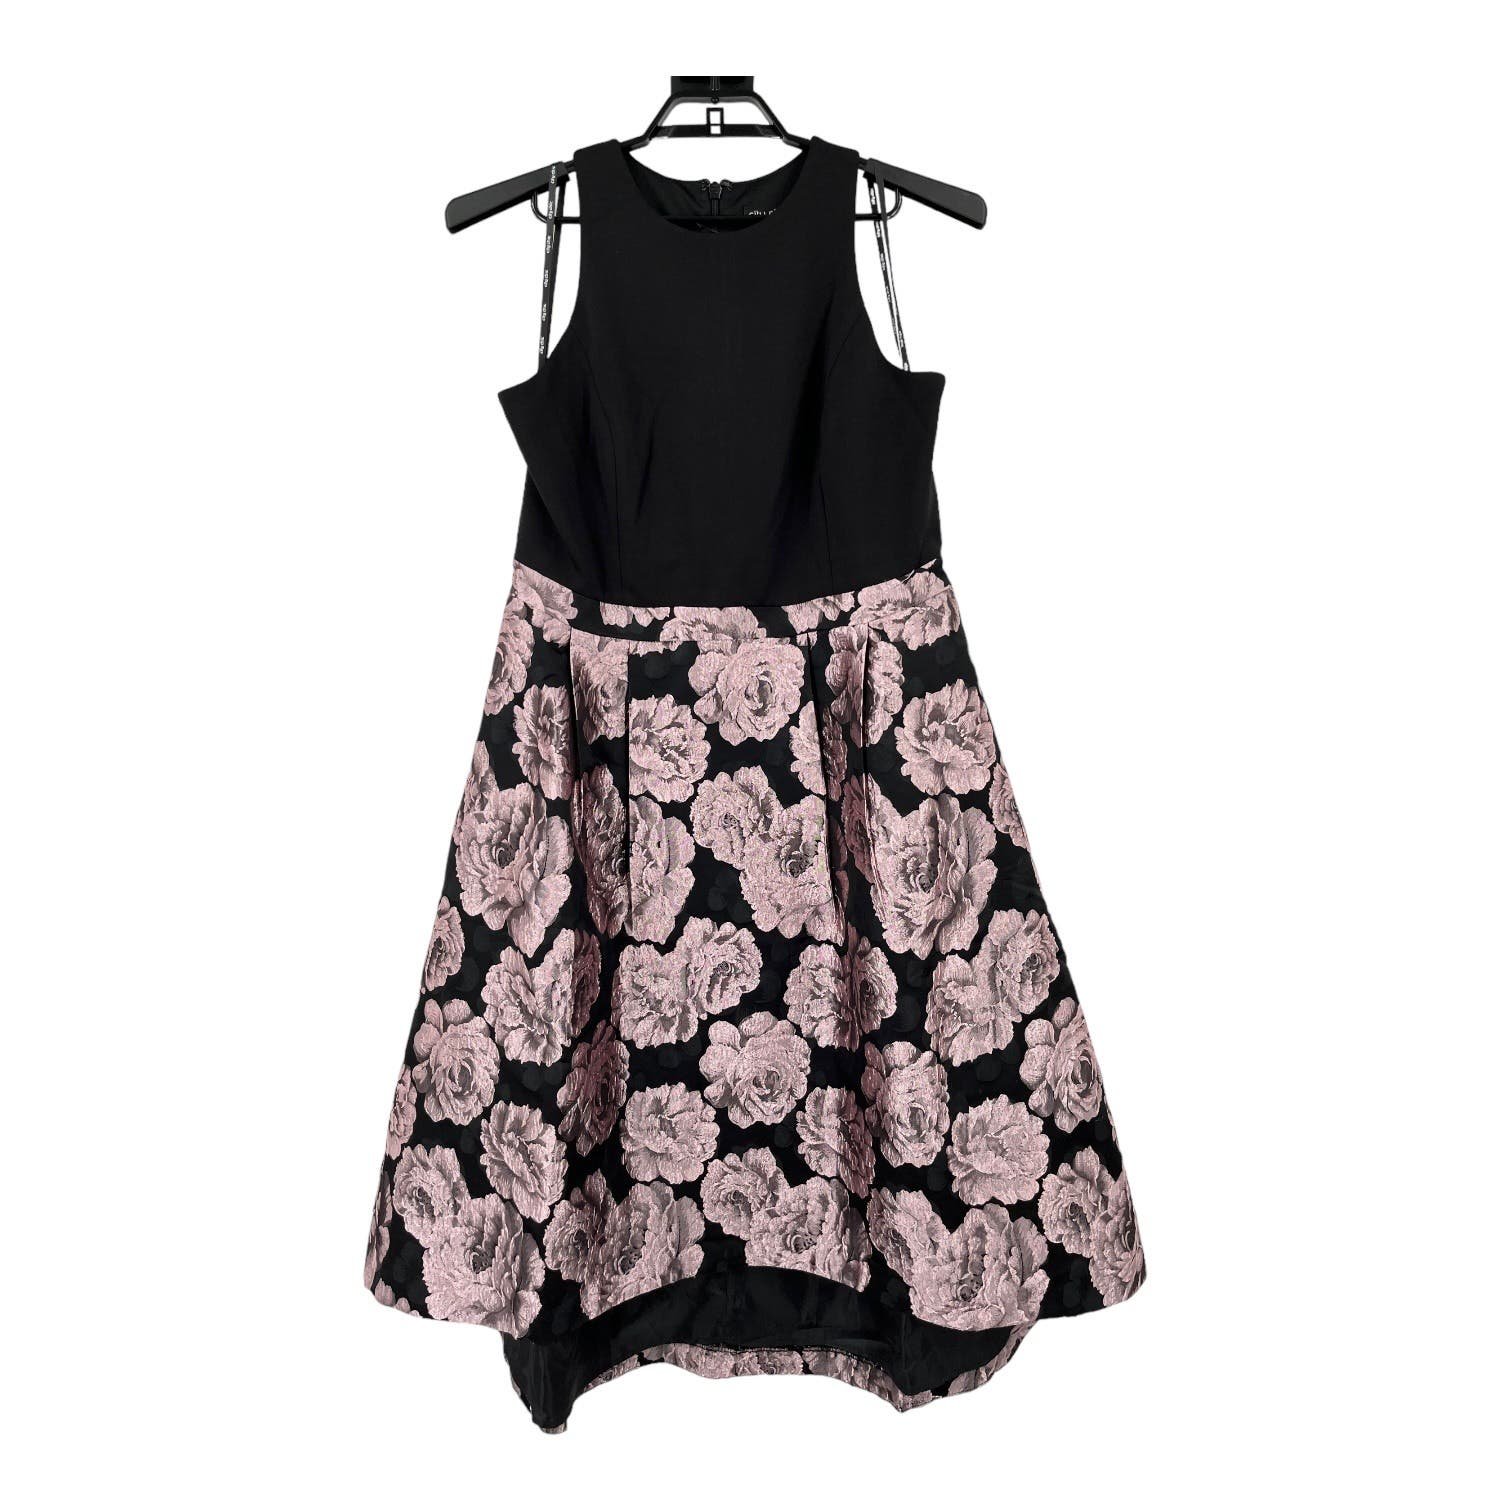 The Best Seller City Chic Dress Beatrice sleeveless pink black S/16 onG09E6XM Cheap